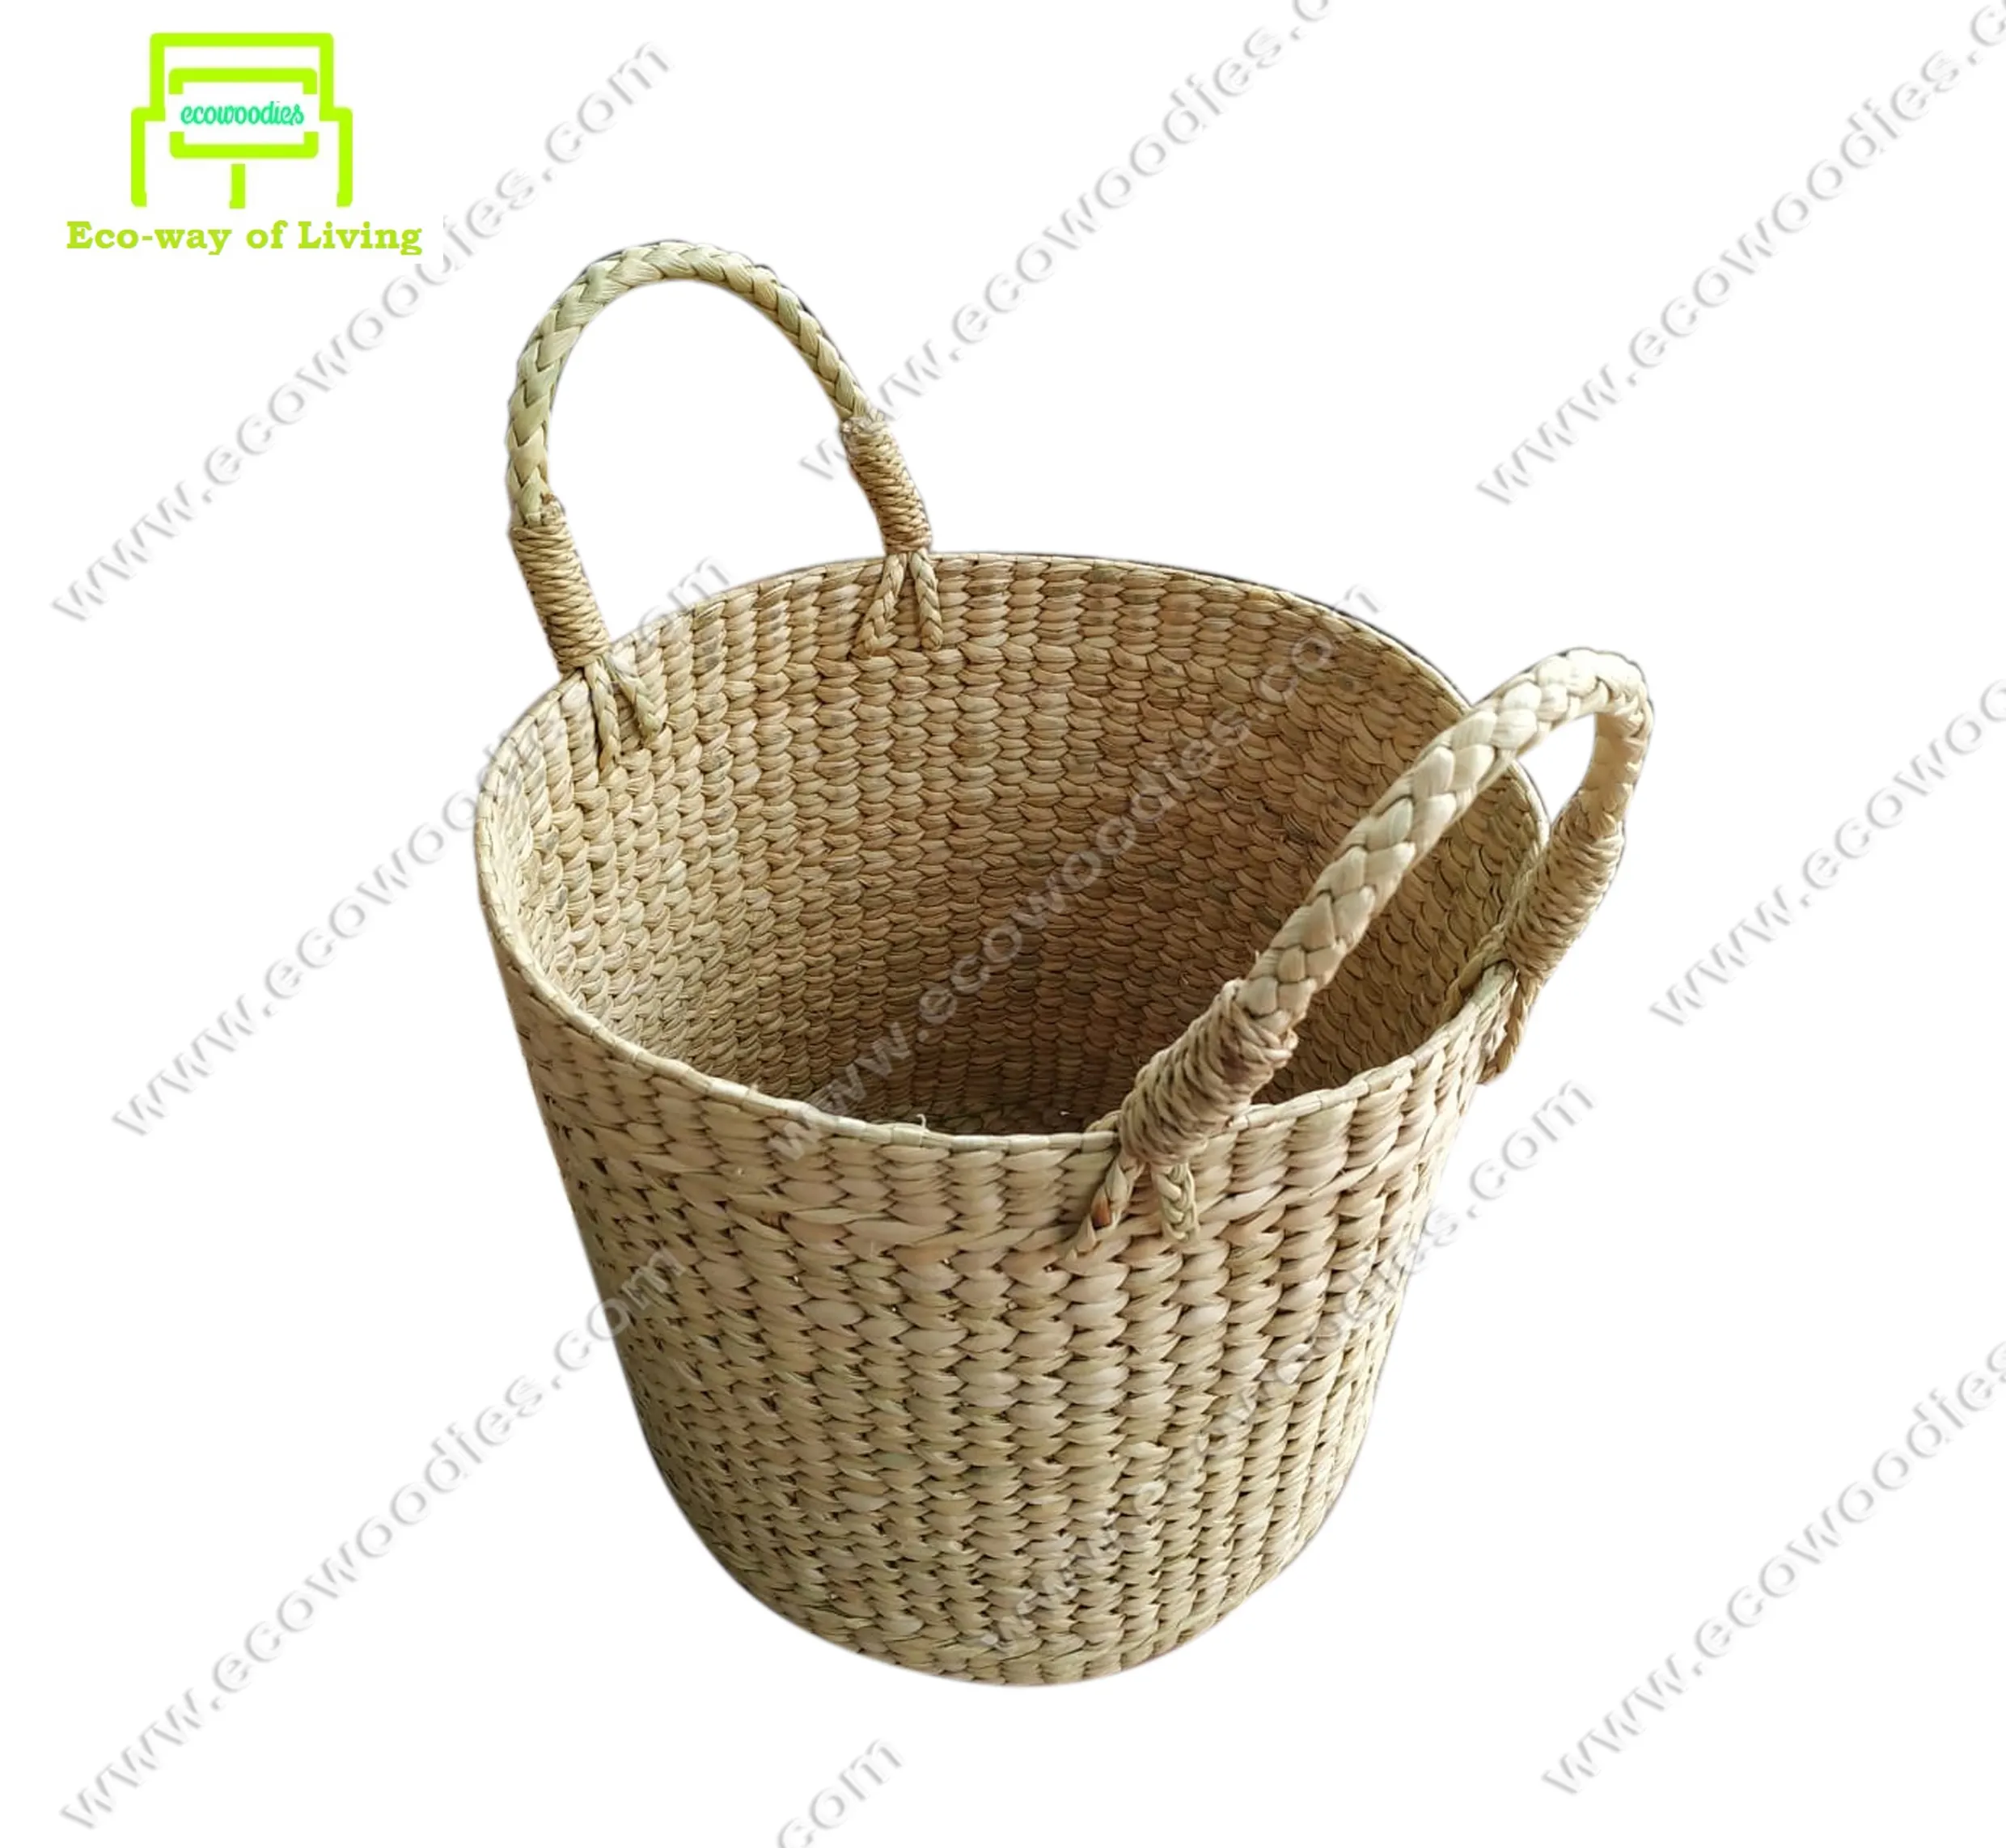 Eco-Friendly Rattan Wicker Newborn Photography Props Safe For Baby Crib Soft Basket With Handle Photo Shoot Props Filler